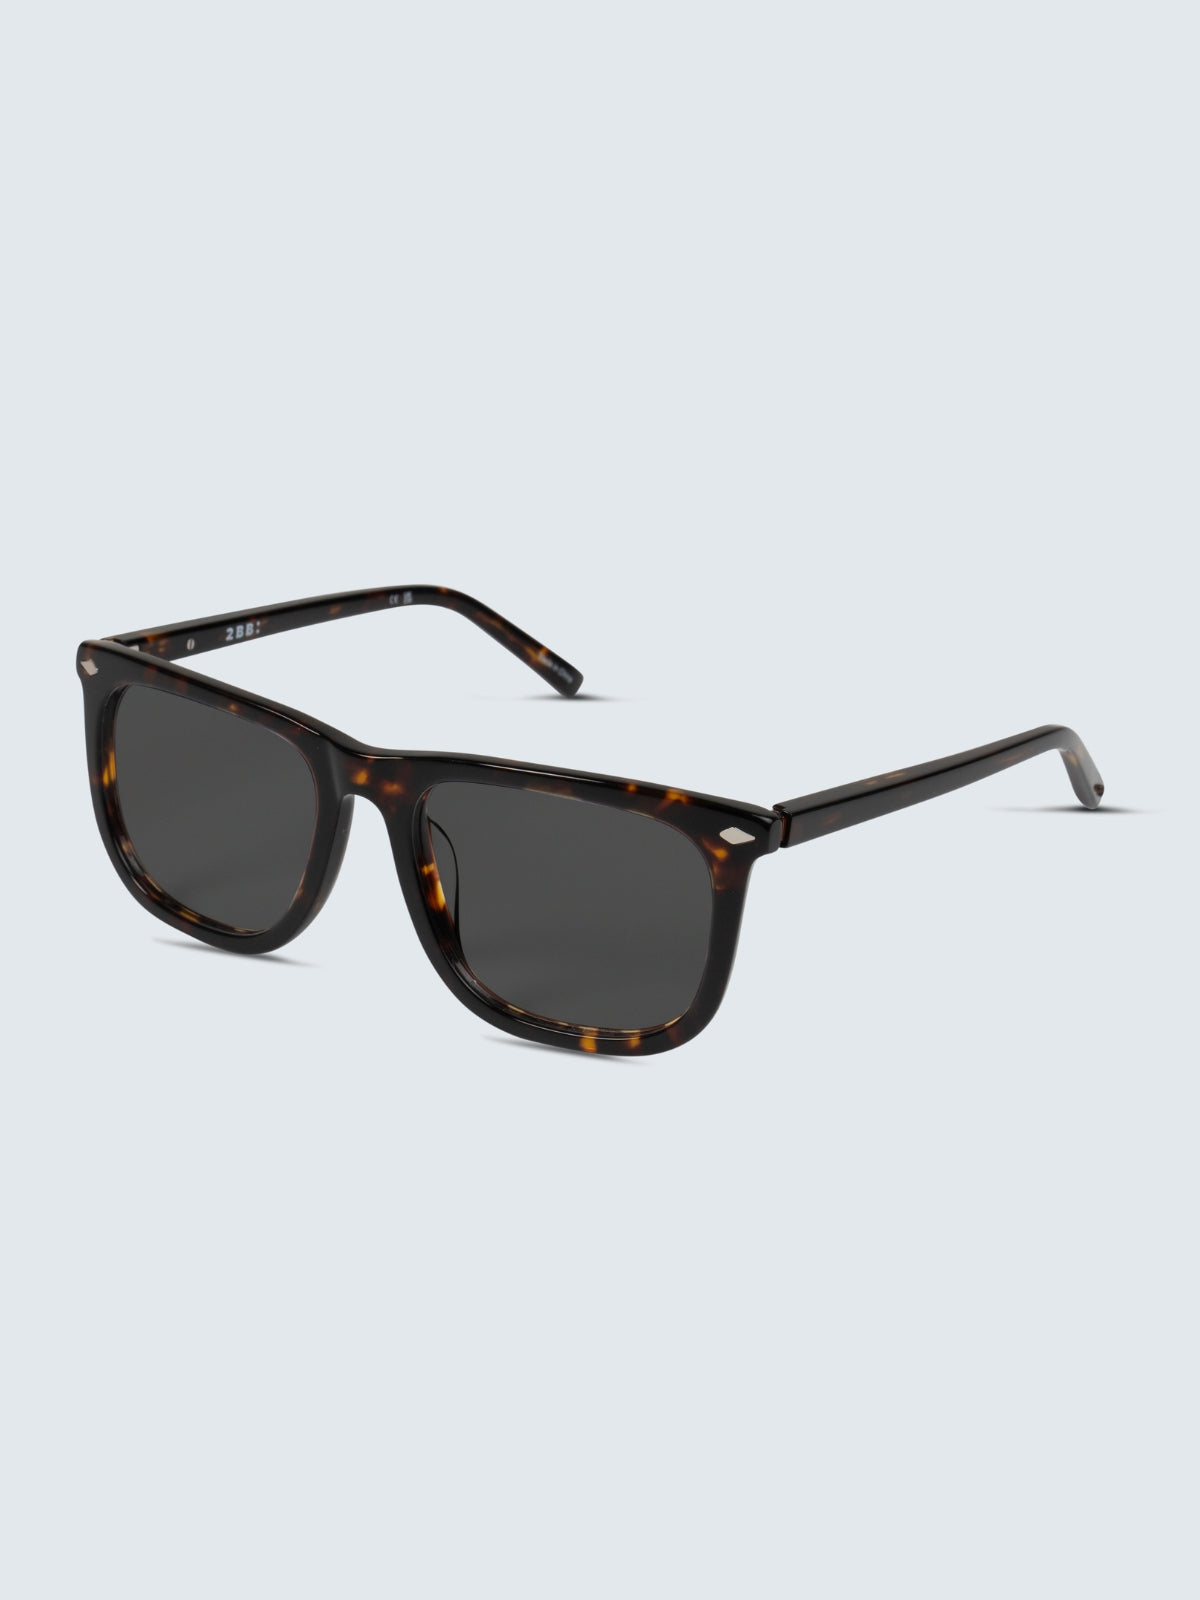 Two Blind Brothers - Sunglasses Cavalier 2.0 Black